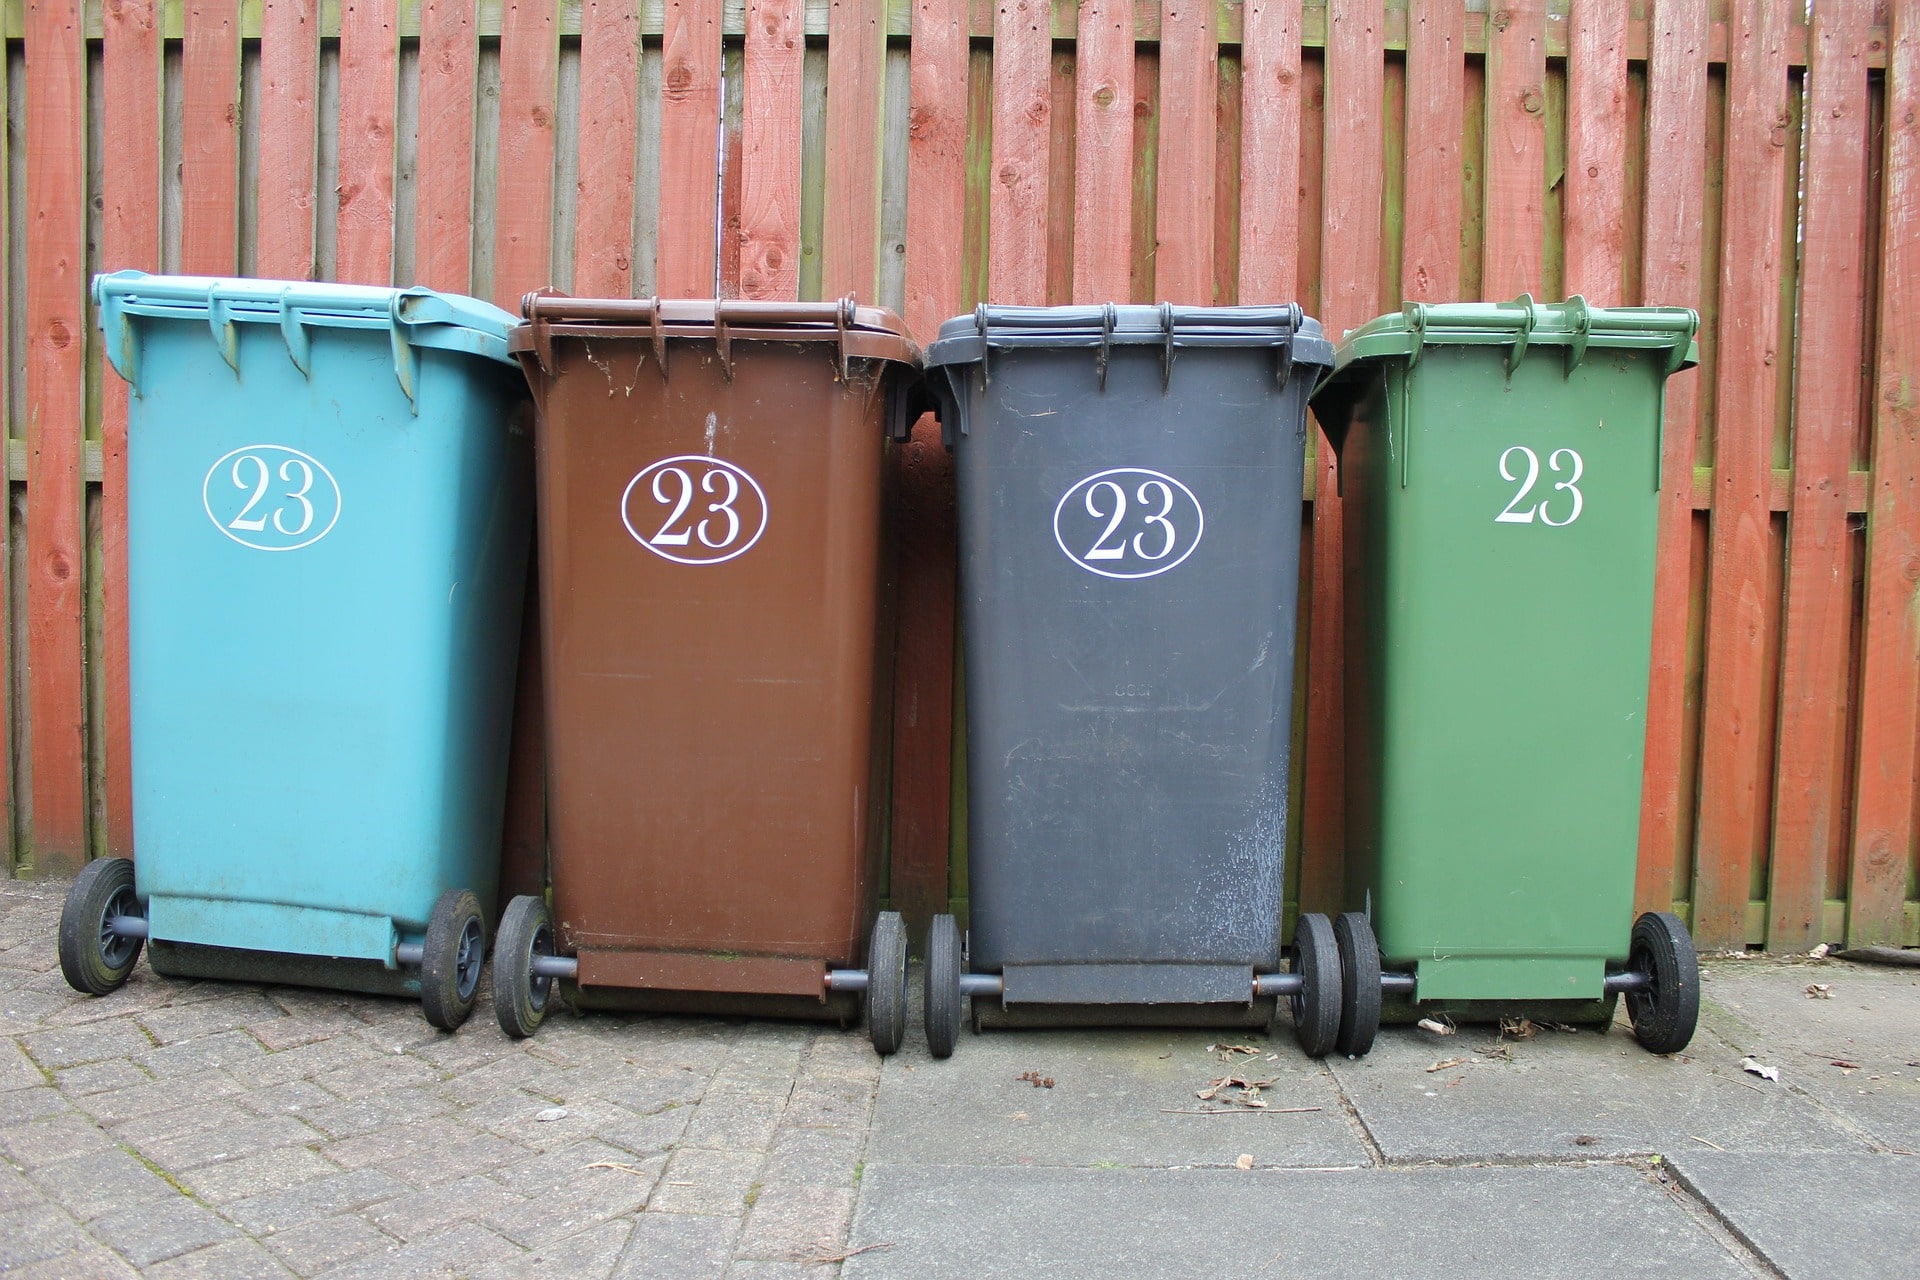 Wheelie Bin Issues with Neighbours? All you Need to Know